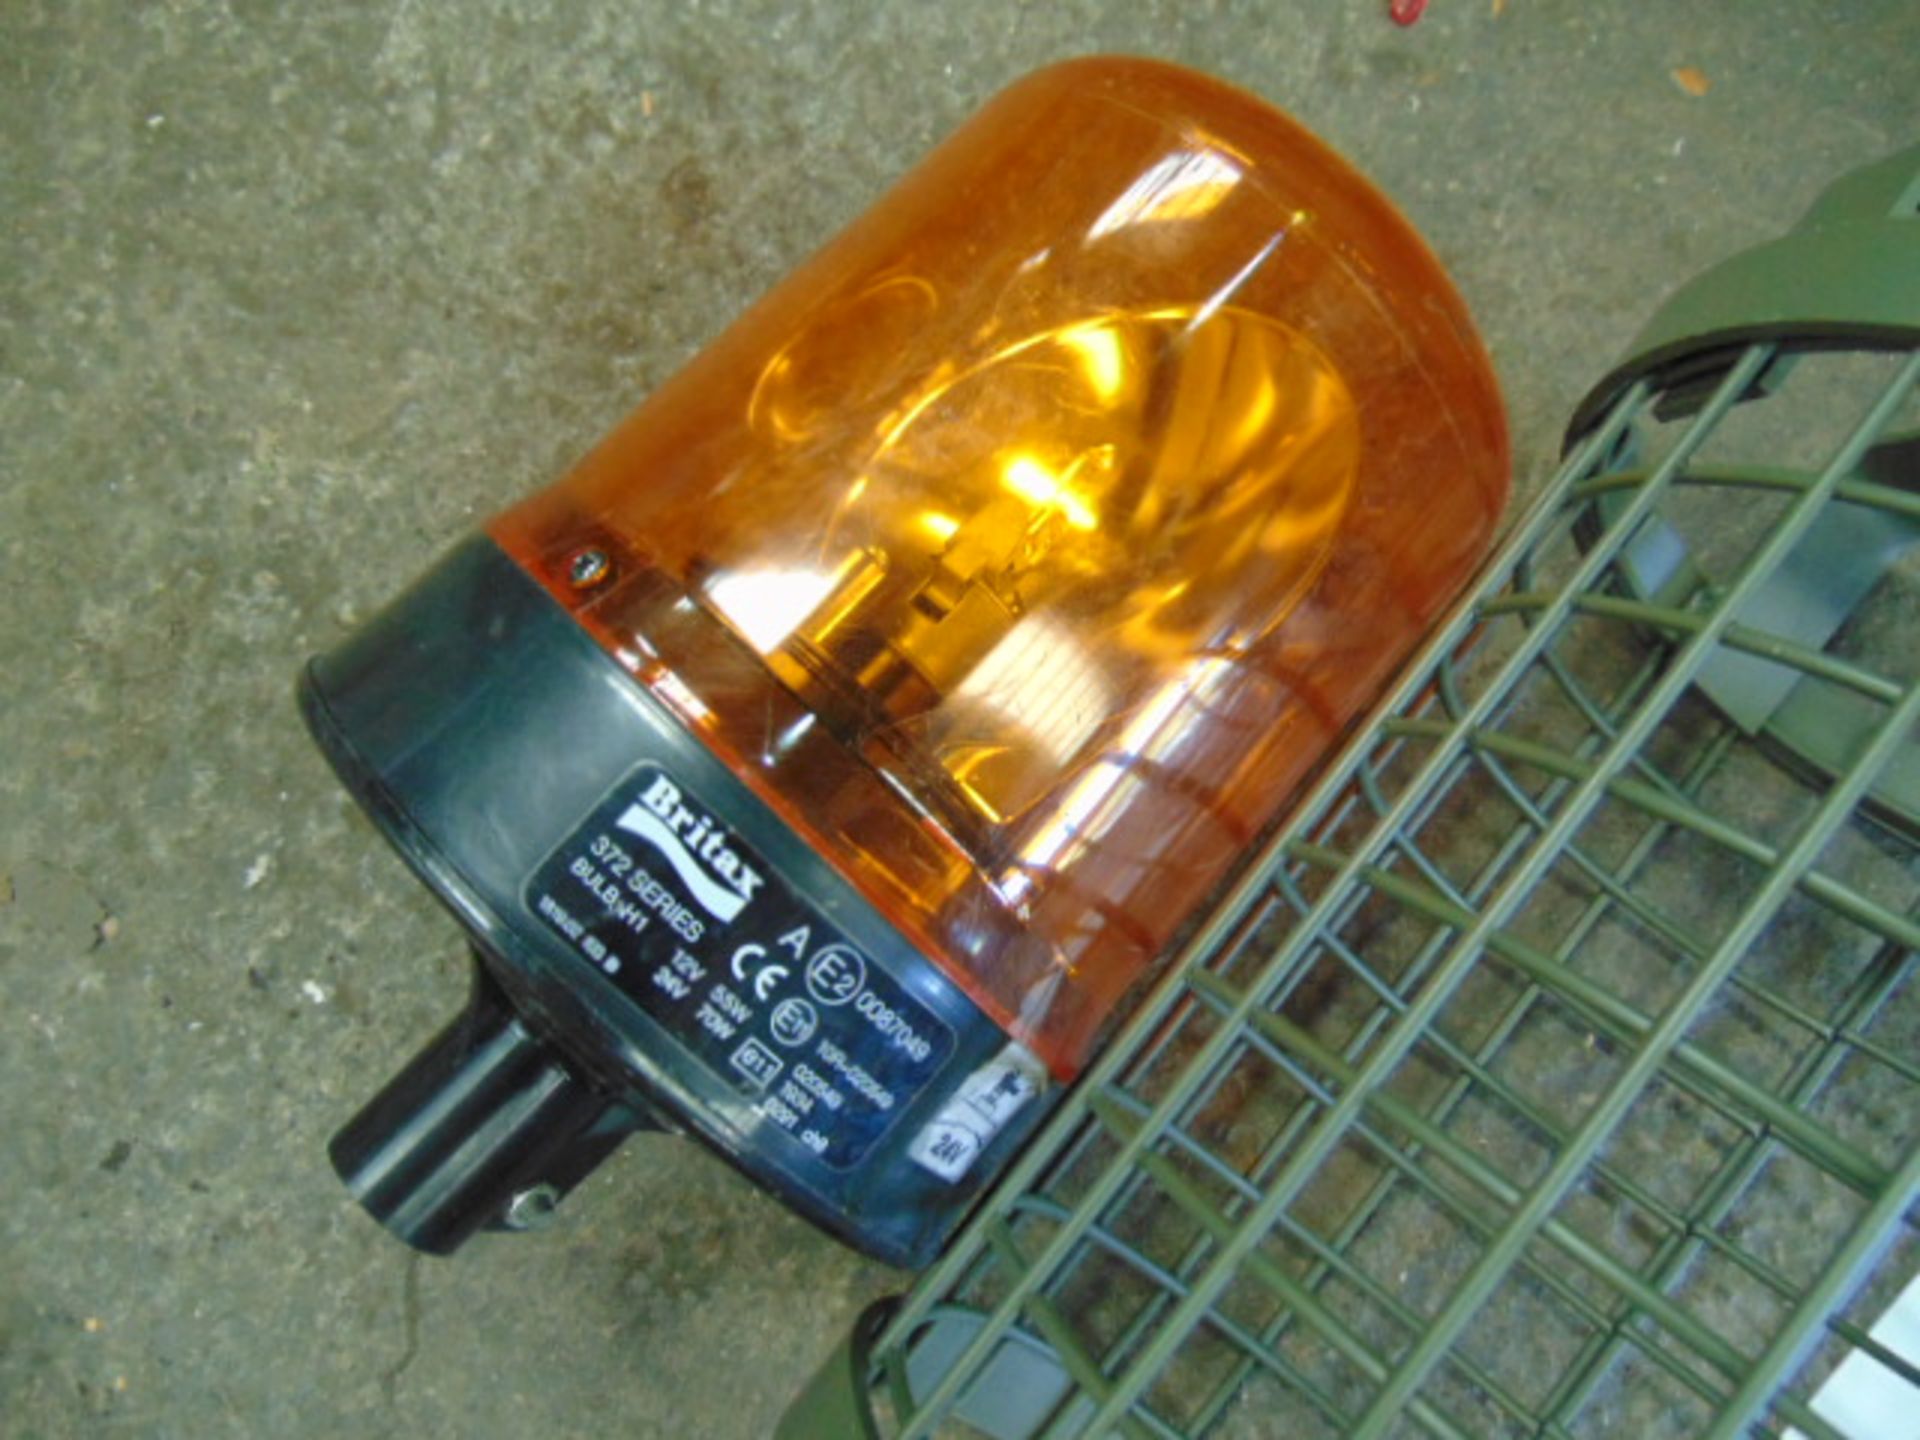 Britax Rotating Amber Beacon & Protective Cage - Image 2 of 4